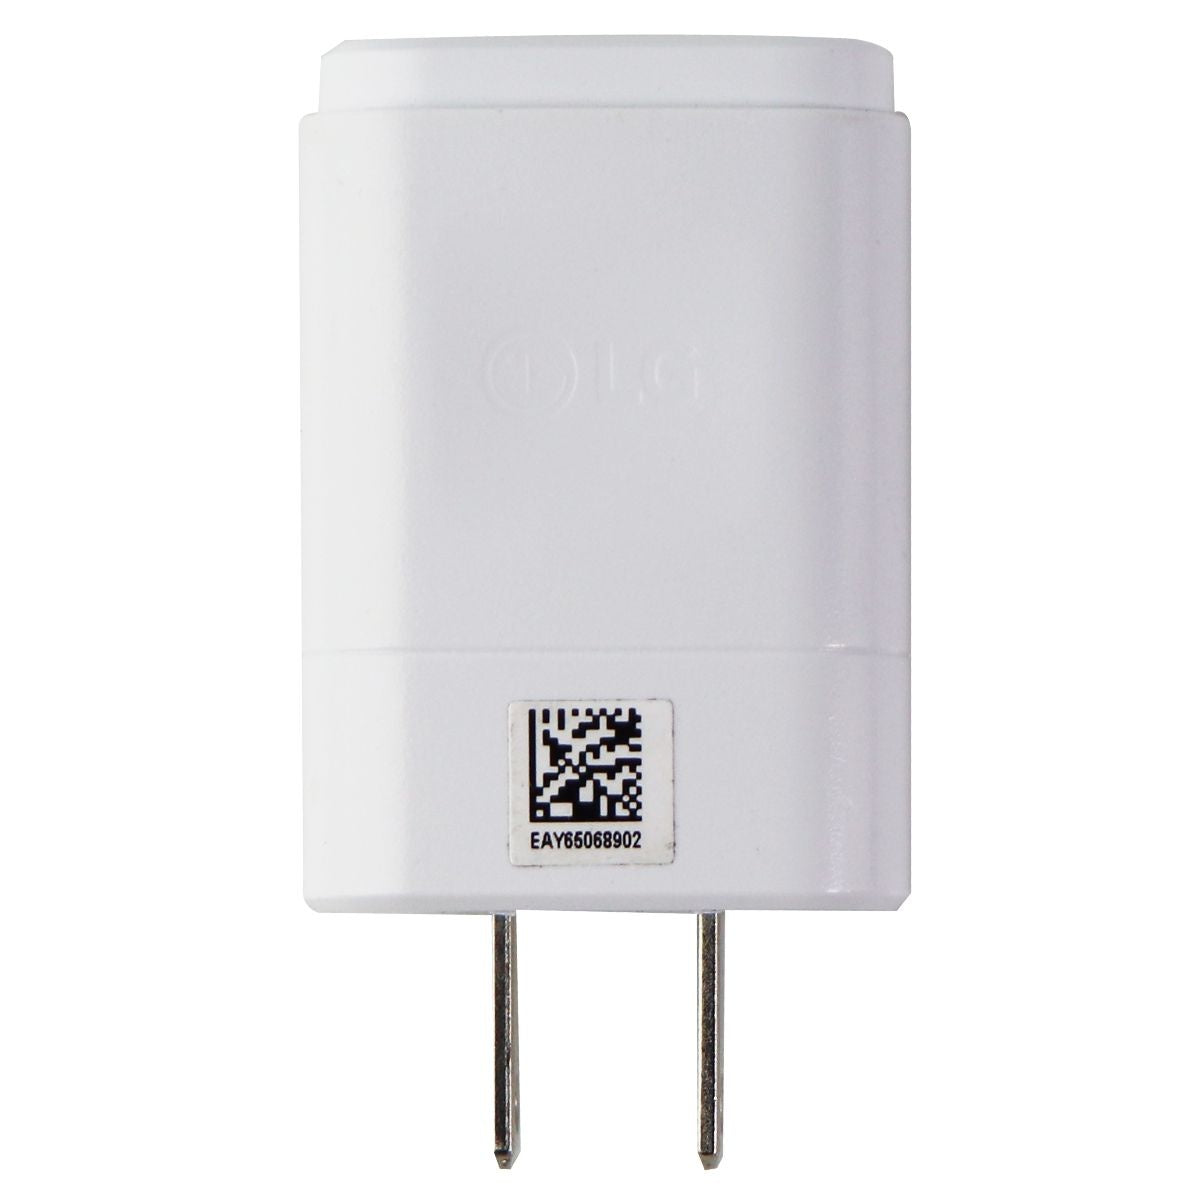 LG Single USB (5.0V/1.2A) Travel Wall Adapter Charger - White (MCS-V01WR/P) Cell Phone - Chargers & Cradles LG    - Simple Cell Bulk Wholesale Pricing - USA Seller